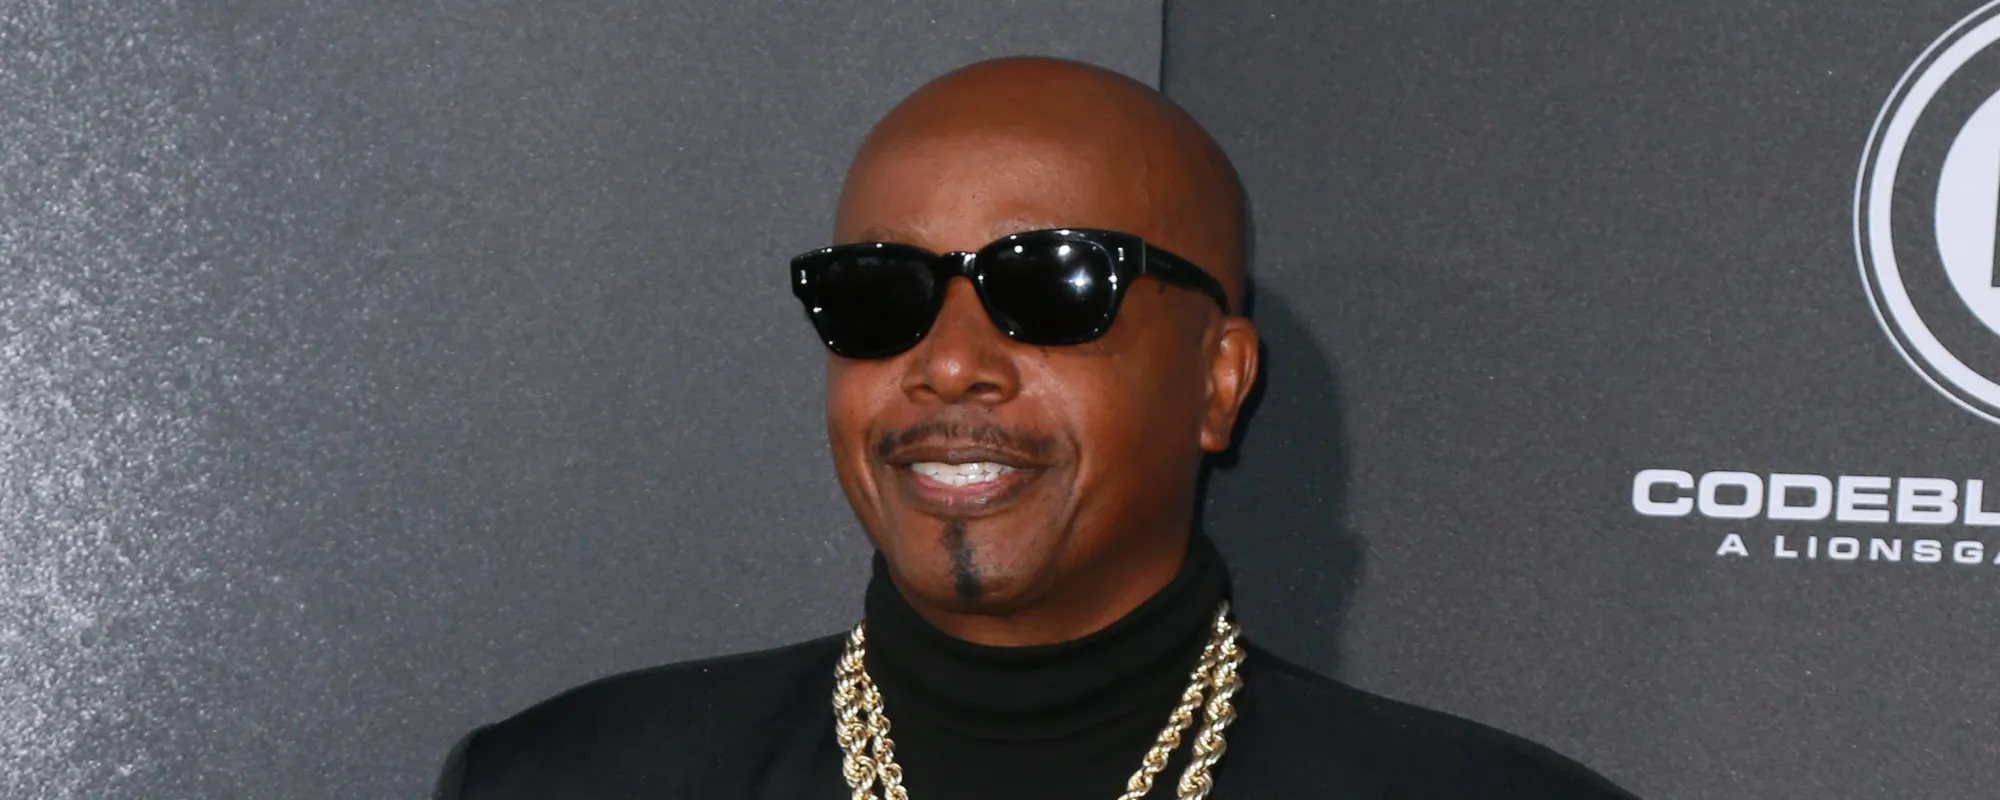 MC Hammer’s Net Worth: From “U Can’t Touch This” to ‘The Addams Family’